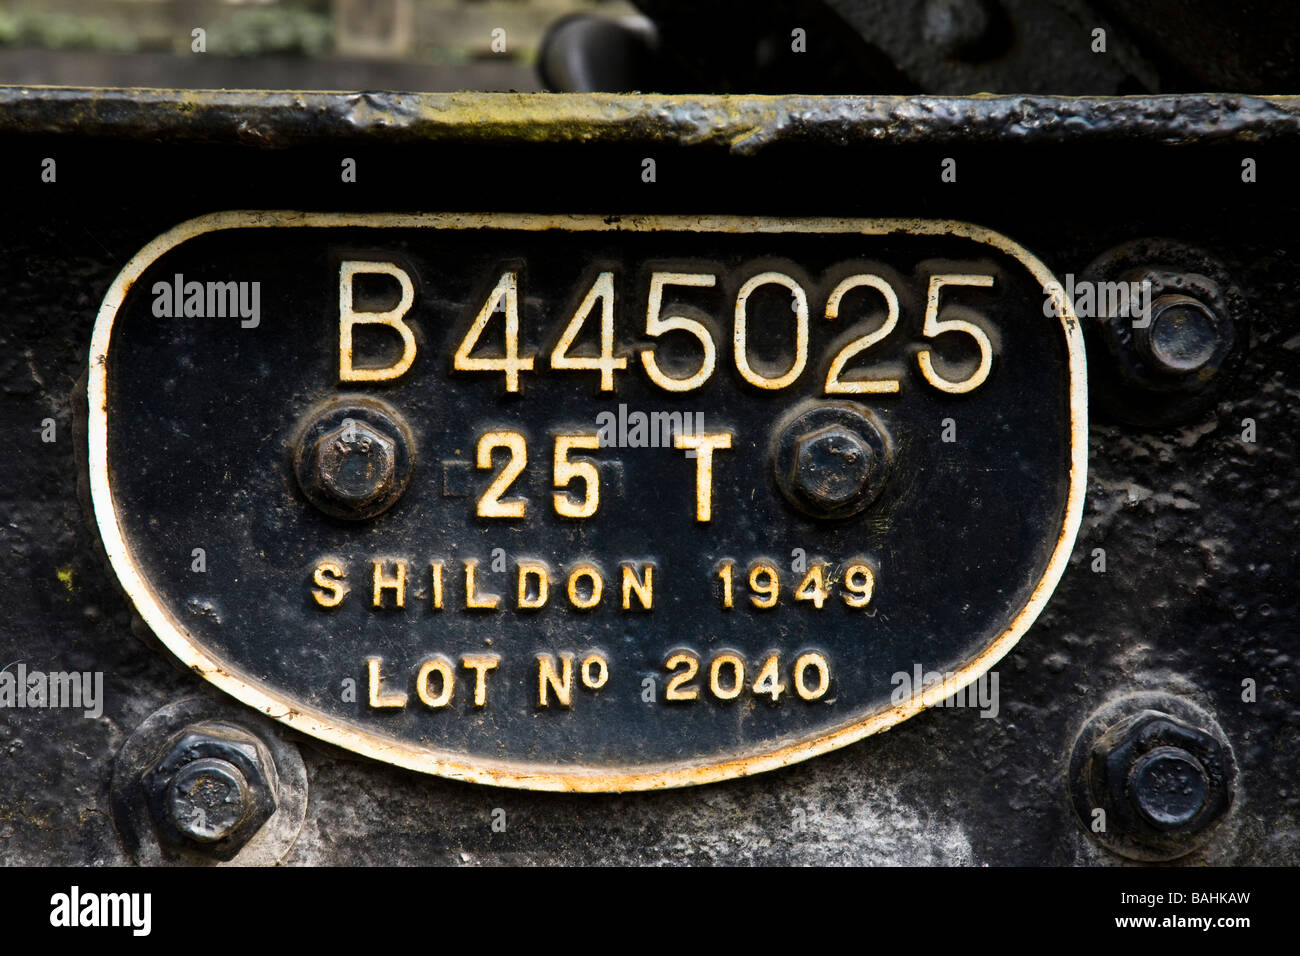 Identification plate on railway rolling stock at Goathland, North Yorkshire Moors Railway. Stock Photo